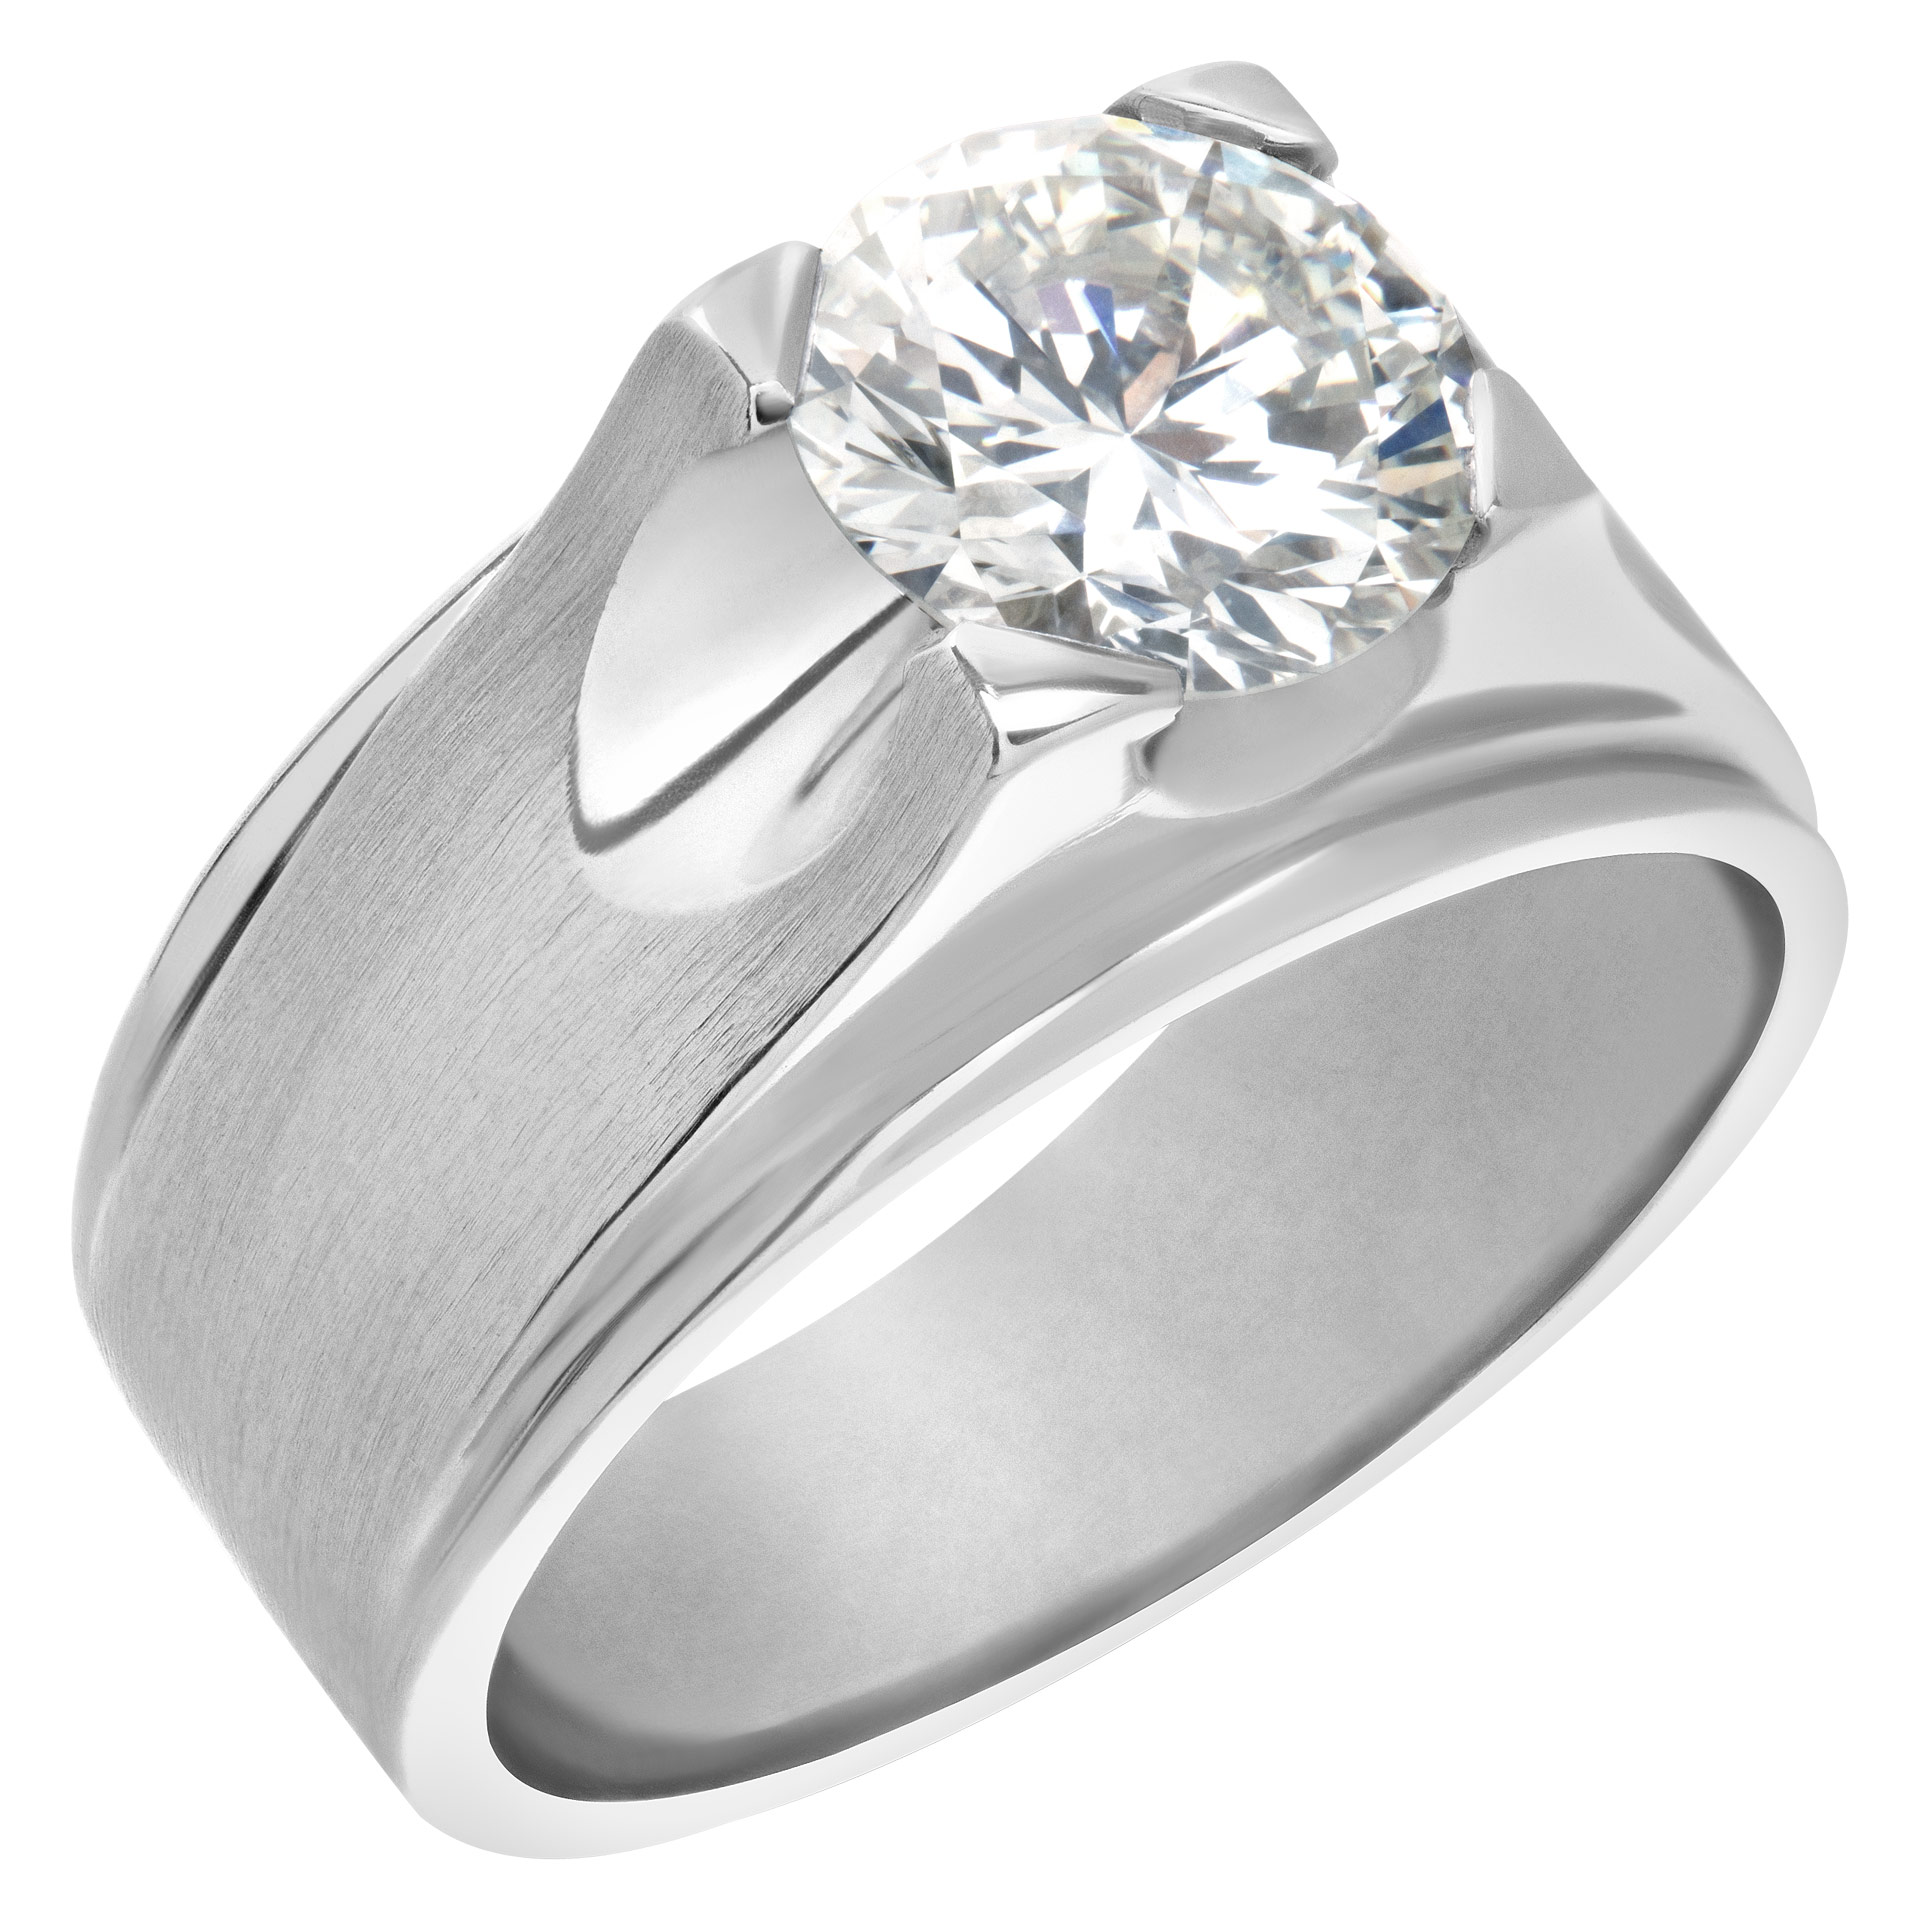 GIA certified 2.01 carat (K color, VVS2 clarity) round brilliant cut diamond in an 18k white gold Gypsy setting. image 2